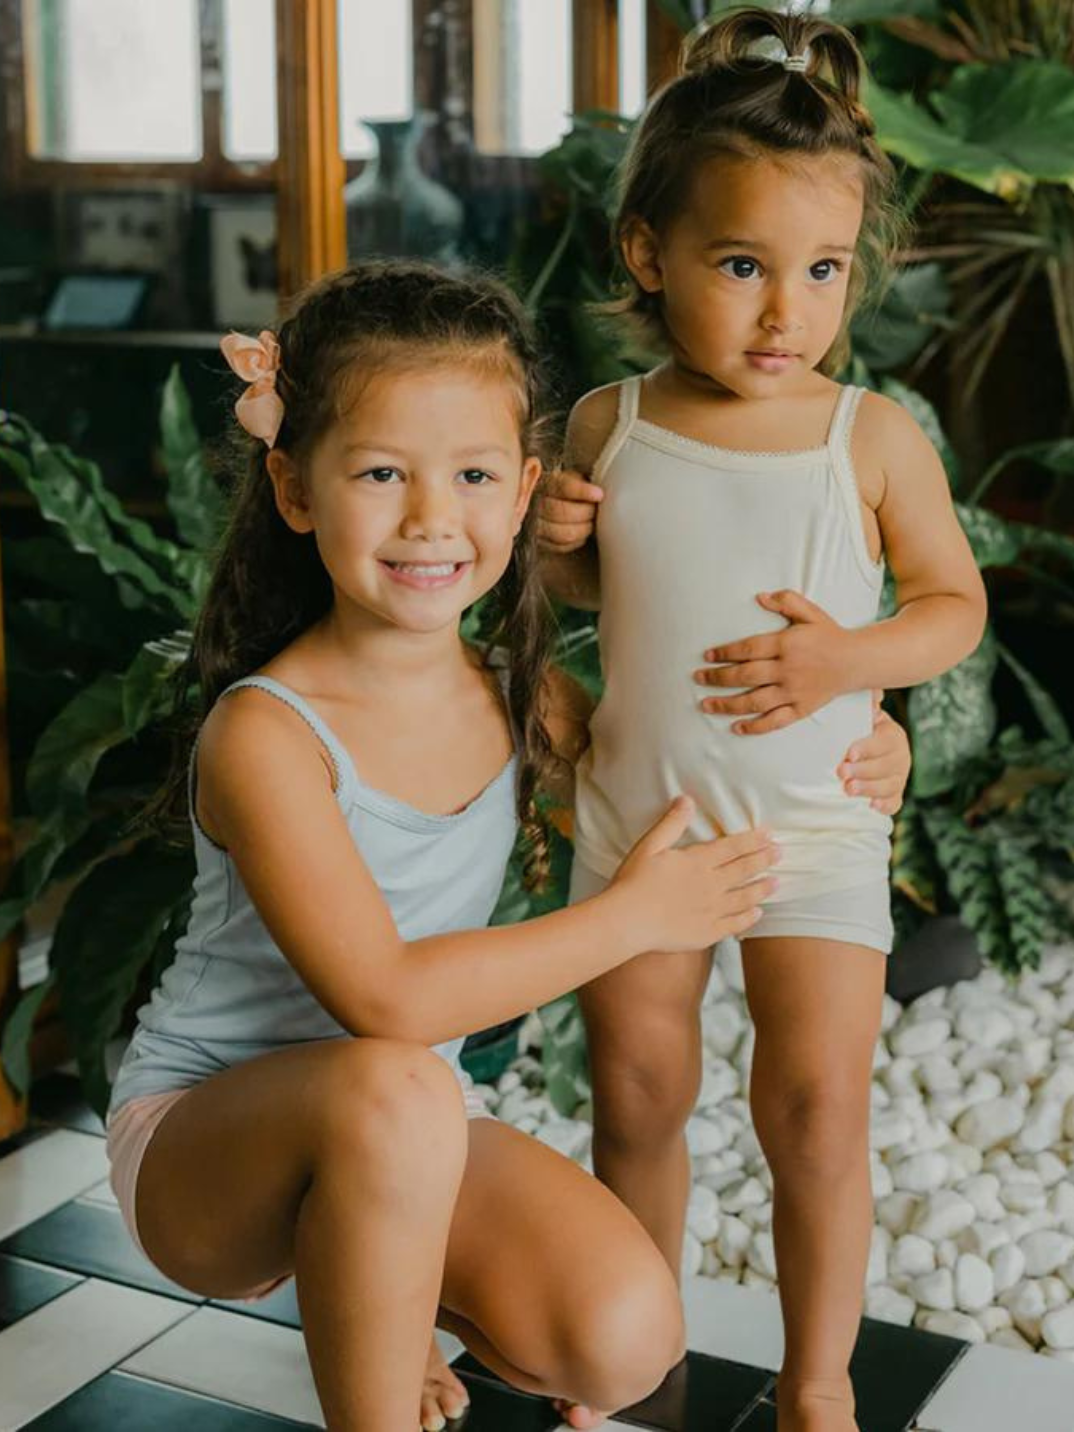 Just Peachy Camisoles are super soft and gentle on your little ones' skin. Designed with a snug fit for play, movement and a comfy night's rest. Add the breathable Camisole layer under your day clothes or snooze in maximum comfort. Blue and cream colors children's camis. Comes in a 2-pack